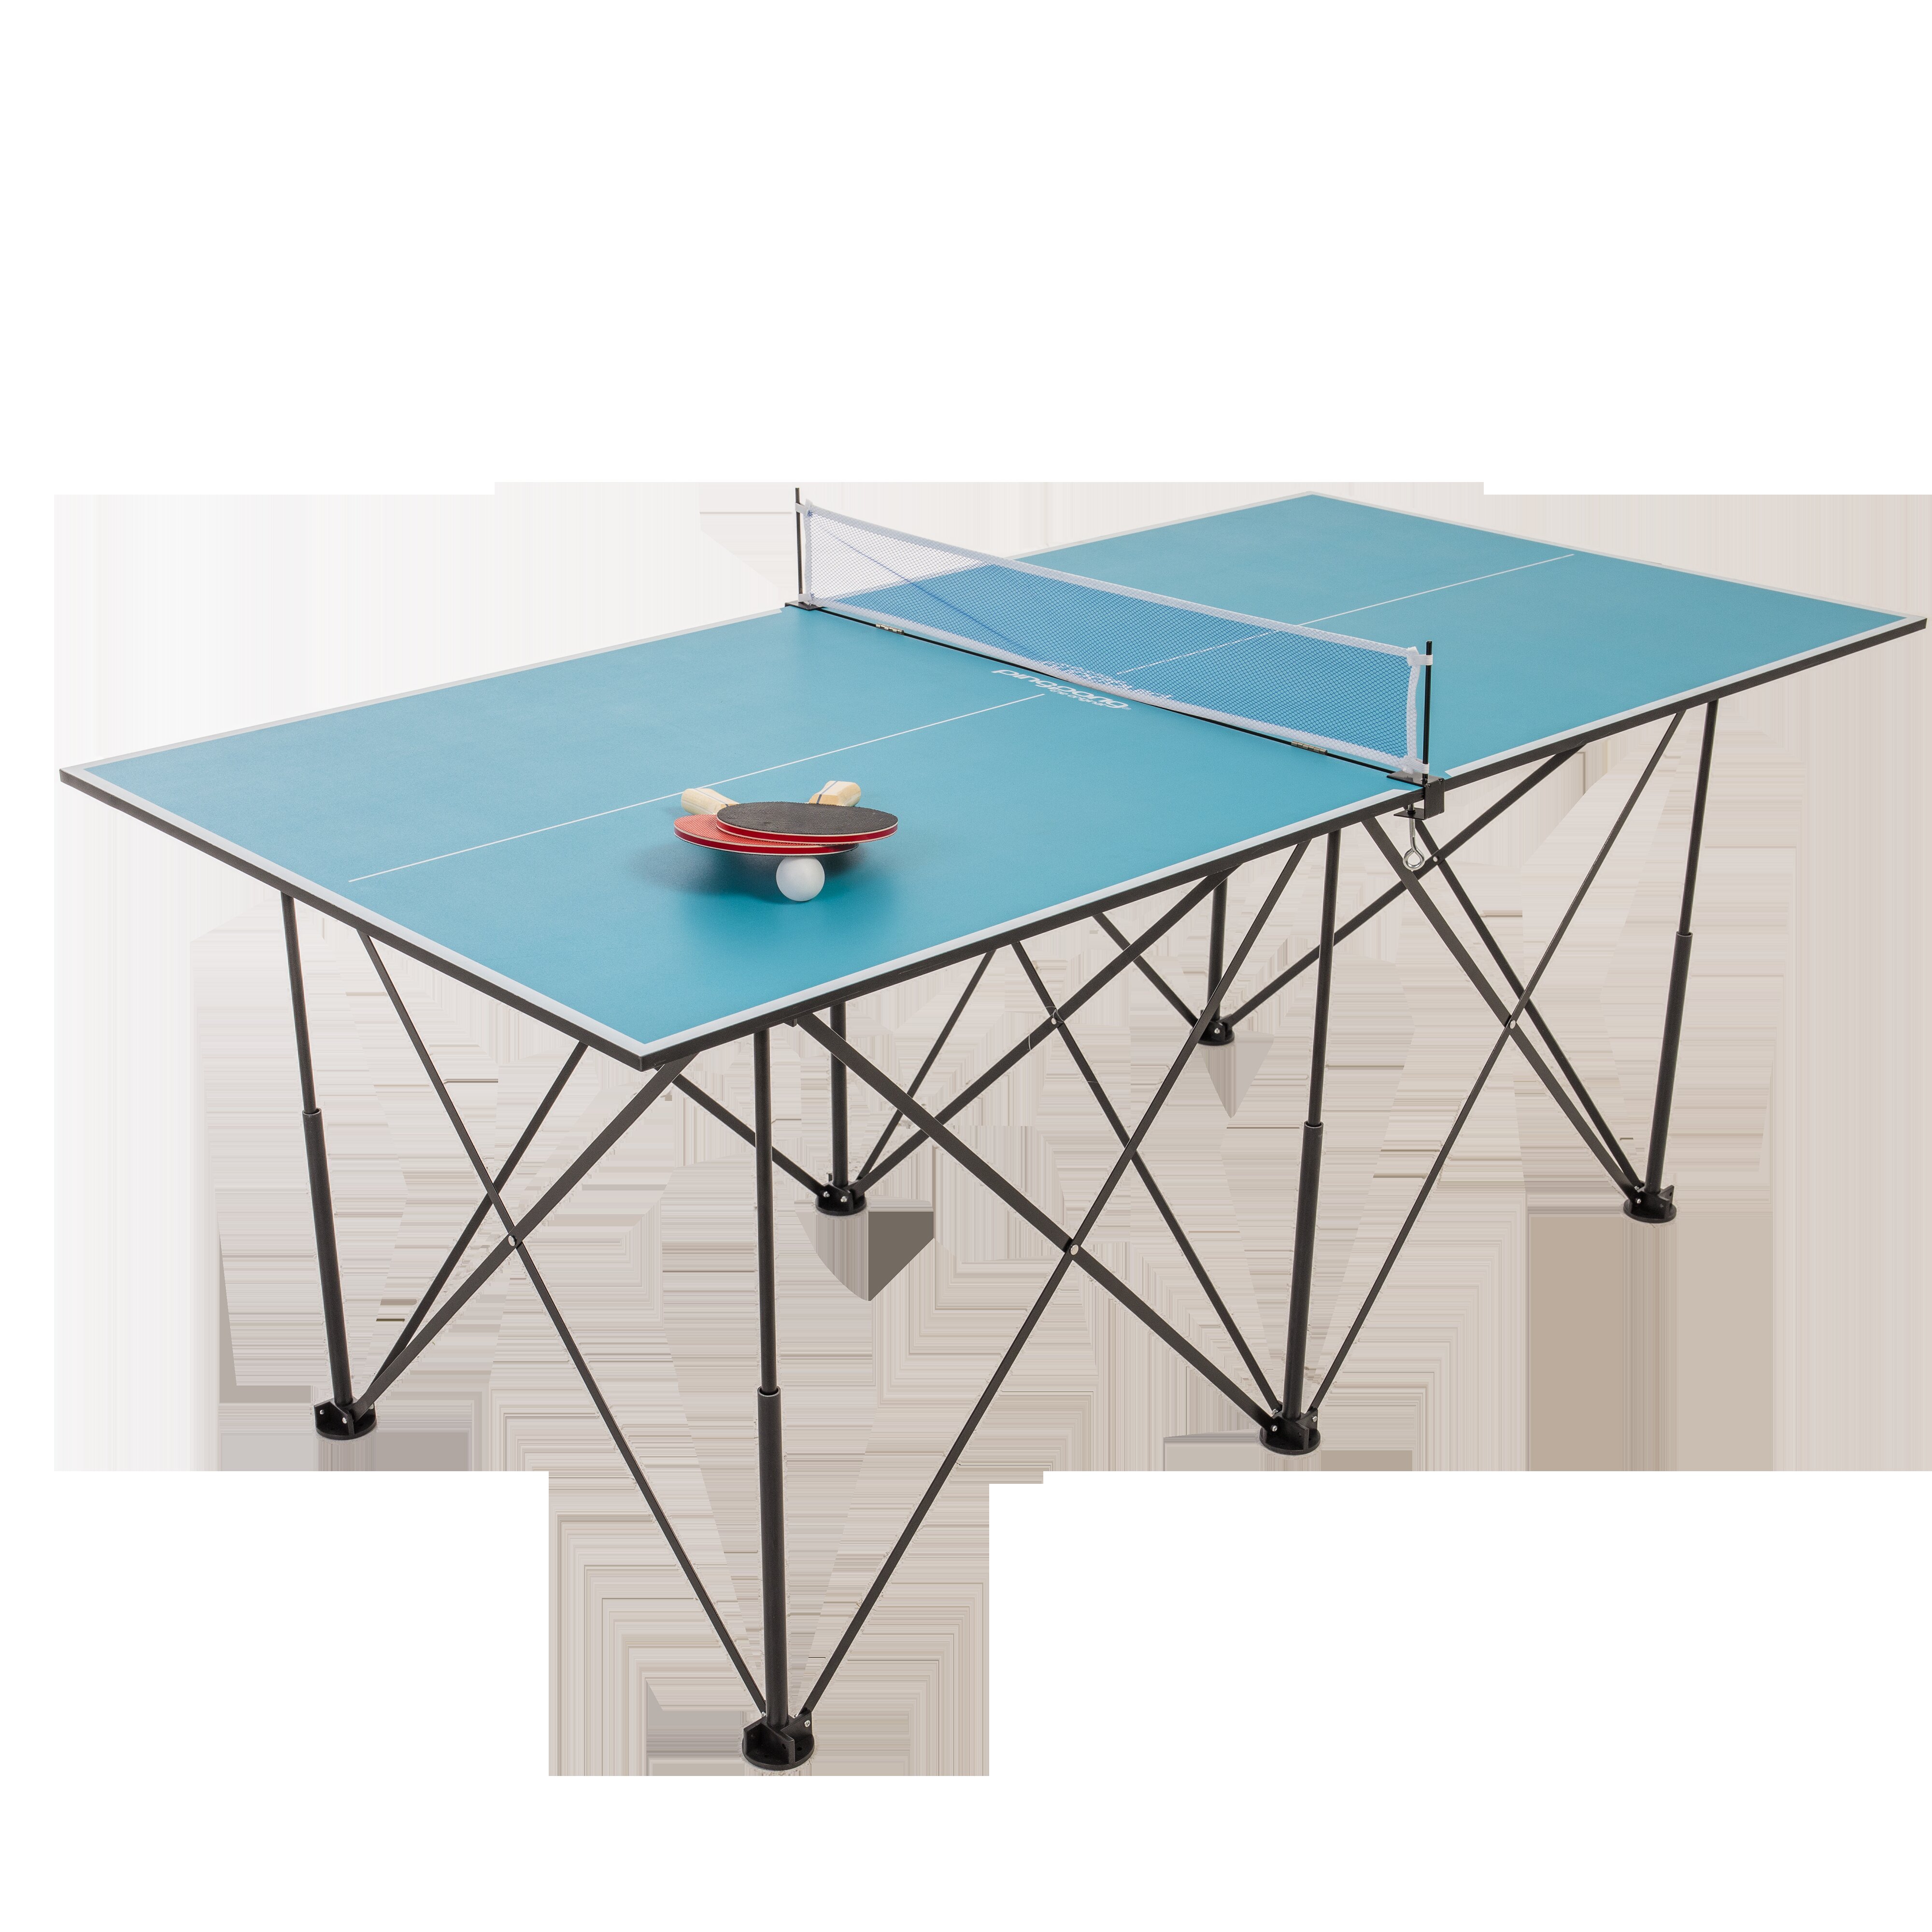 Greensen Portable Tennis Table Folding Ping Pong Table Game Set with Net Indoor Outdoor Tennis Table Aluminum Ping Pong Table with 2 Table Tennis Paddles and 3 Ping Pong Balls 60x30x30in Blue 